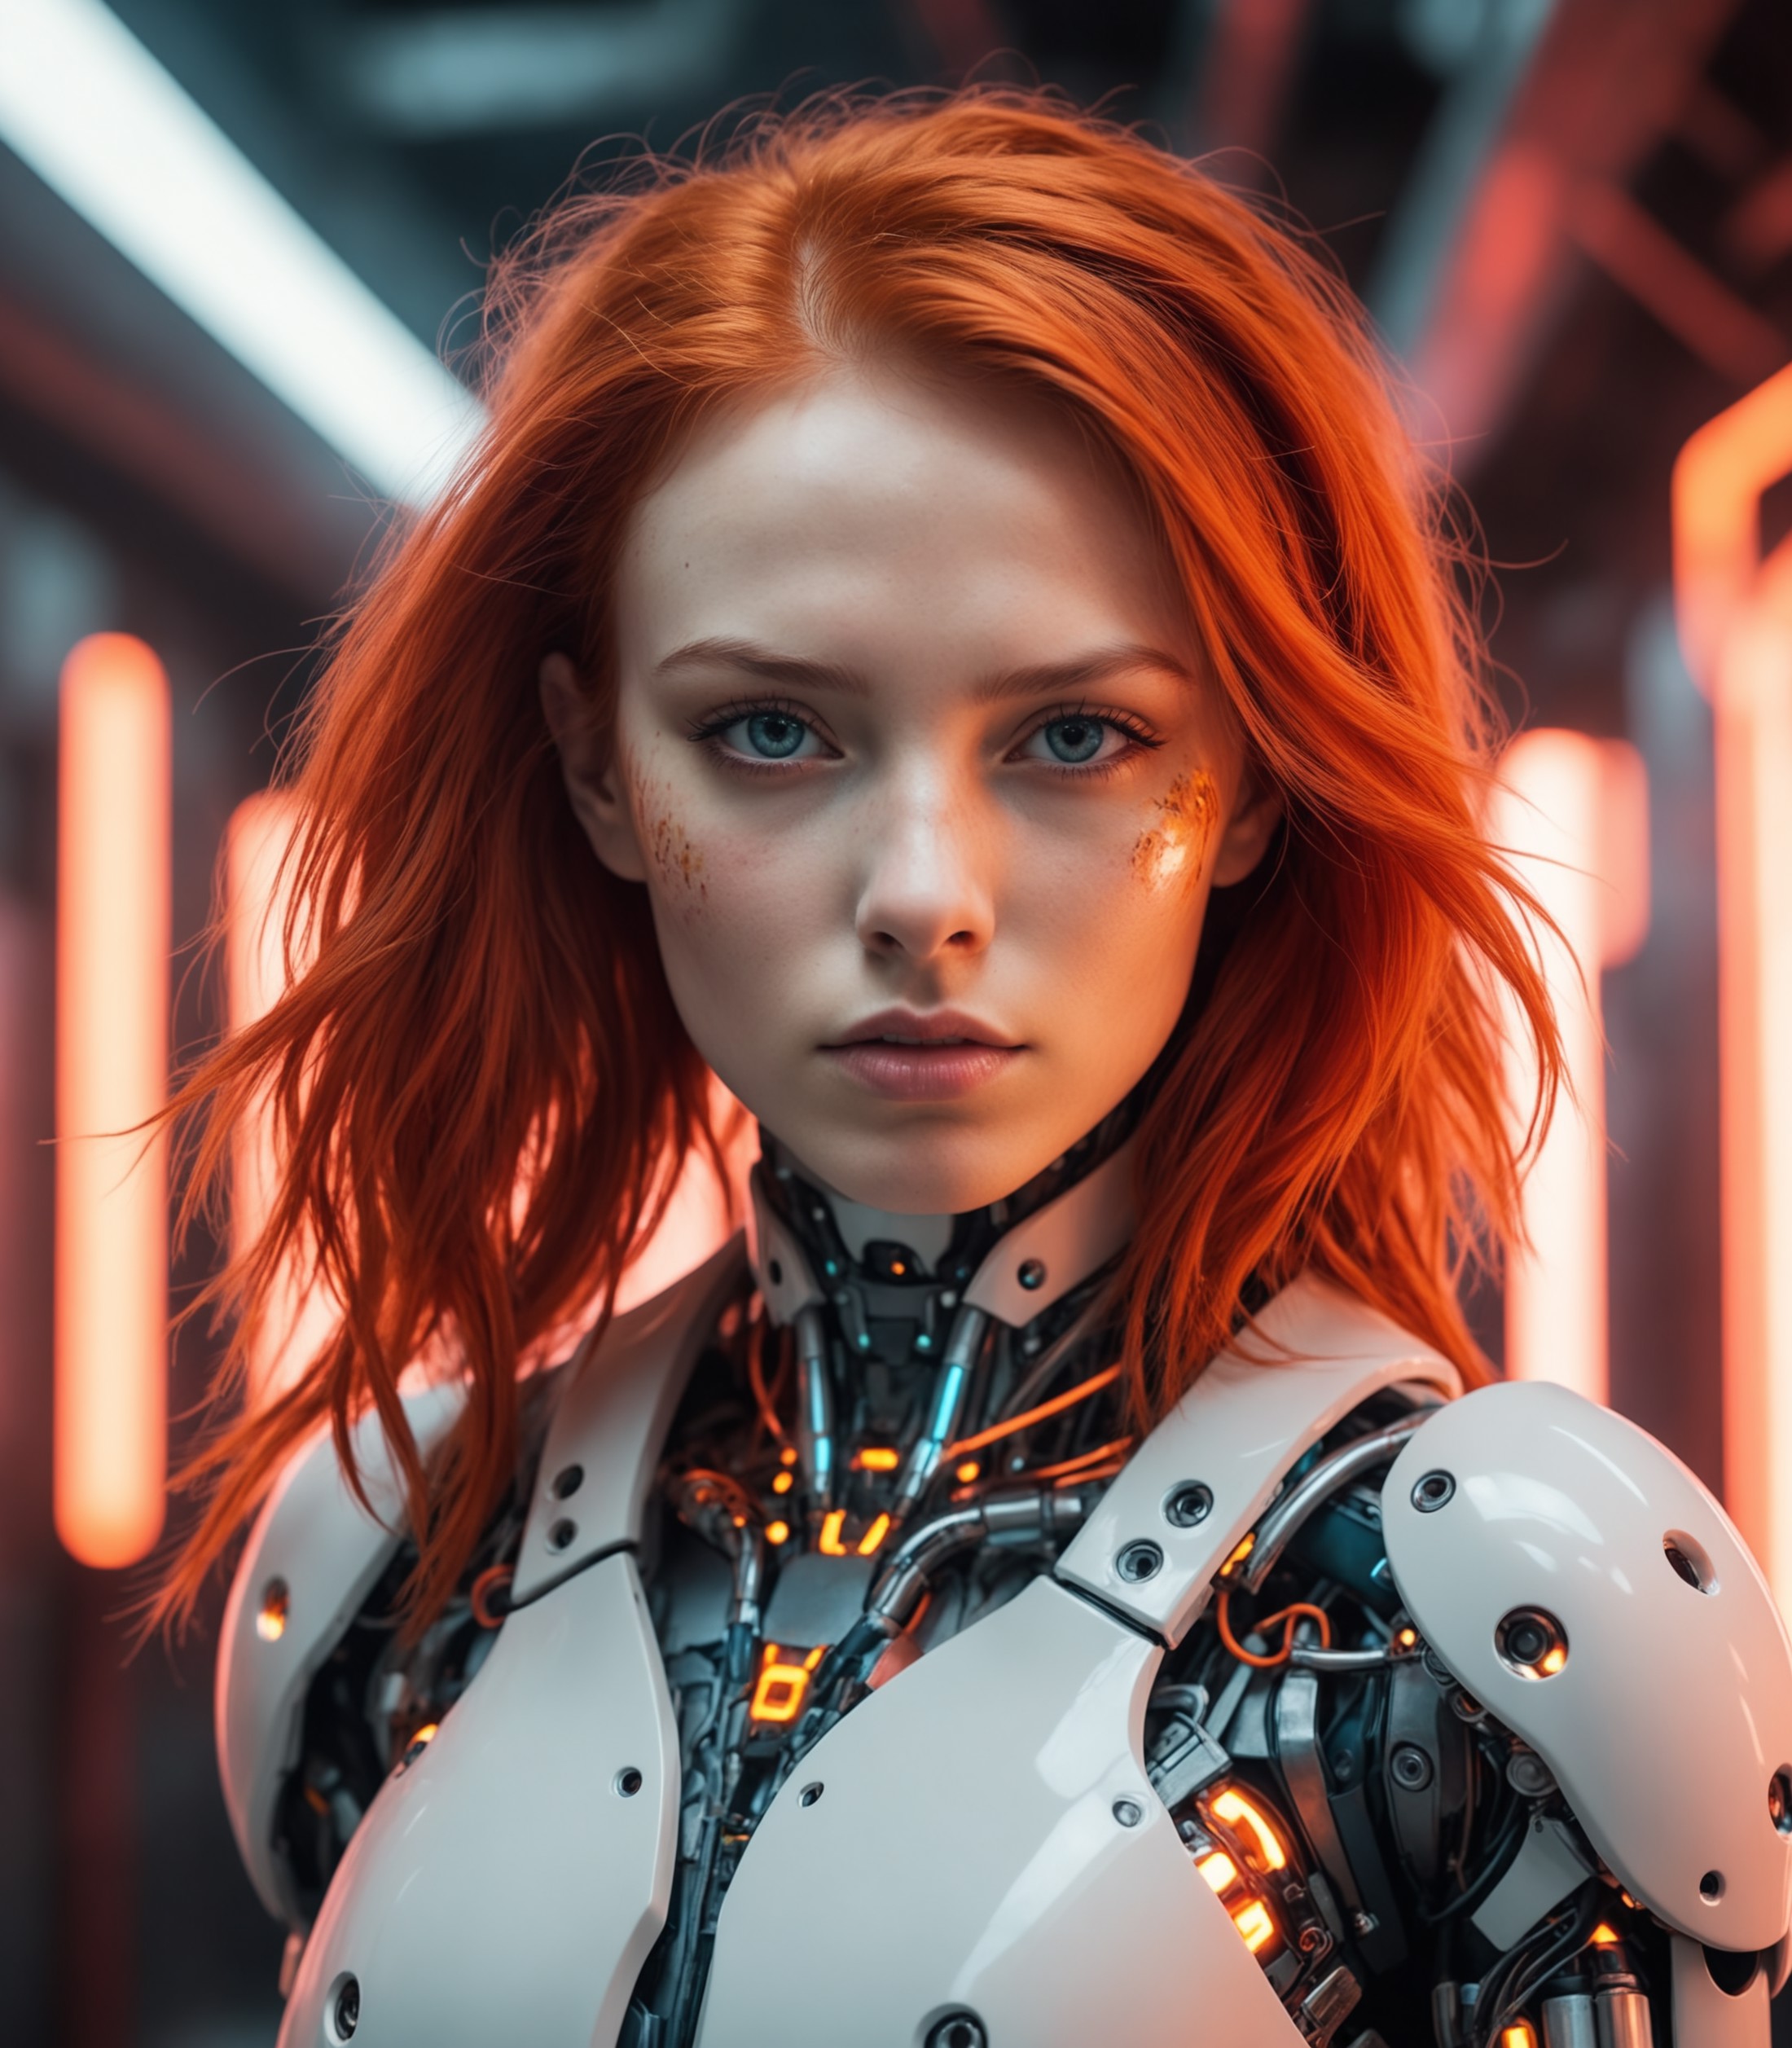 Best quality, Raw photo, face portrait, a young cyborg woman with fiery red hair. Her face fills the frame, bathed in neon...